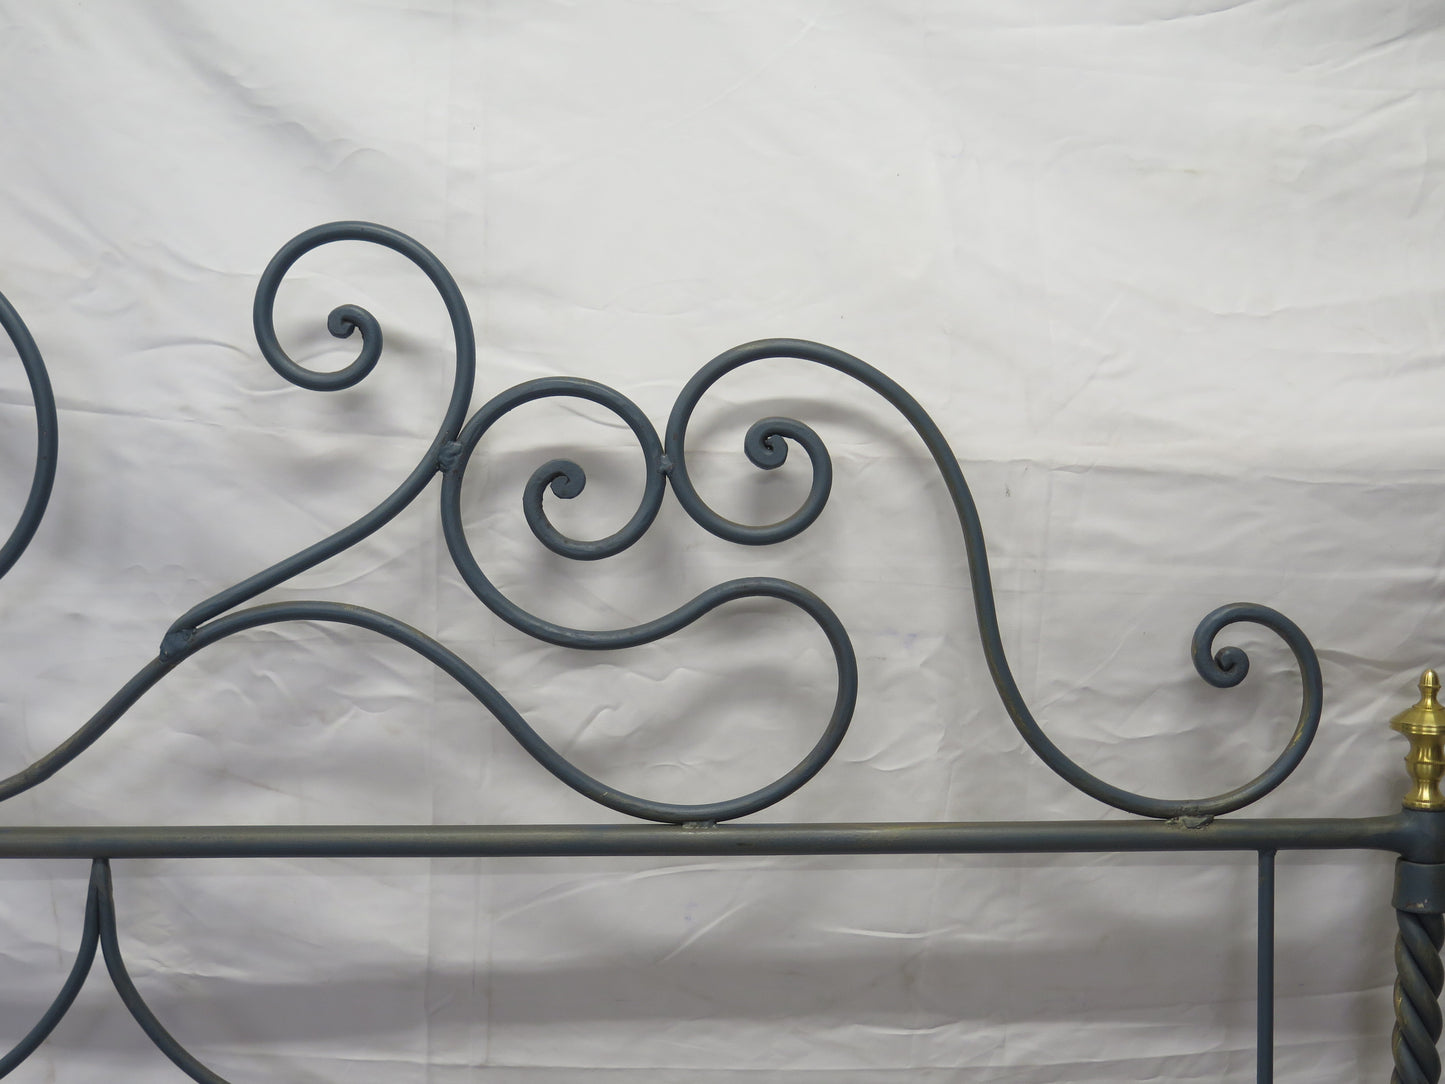 WROUGHT IRON HEADBOARD VINTAGE HEADBOARD FOR DOUBLE BED 62 CH